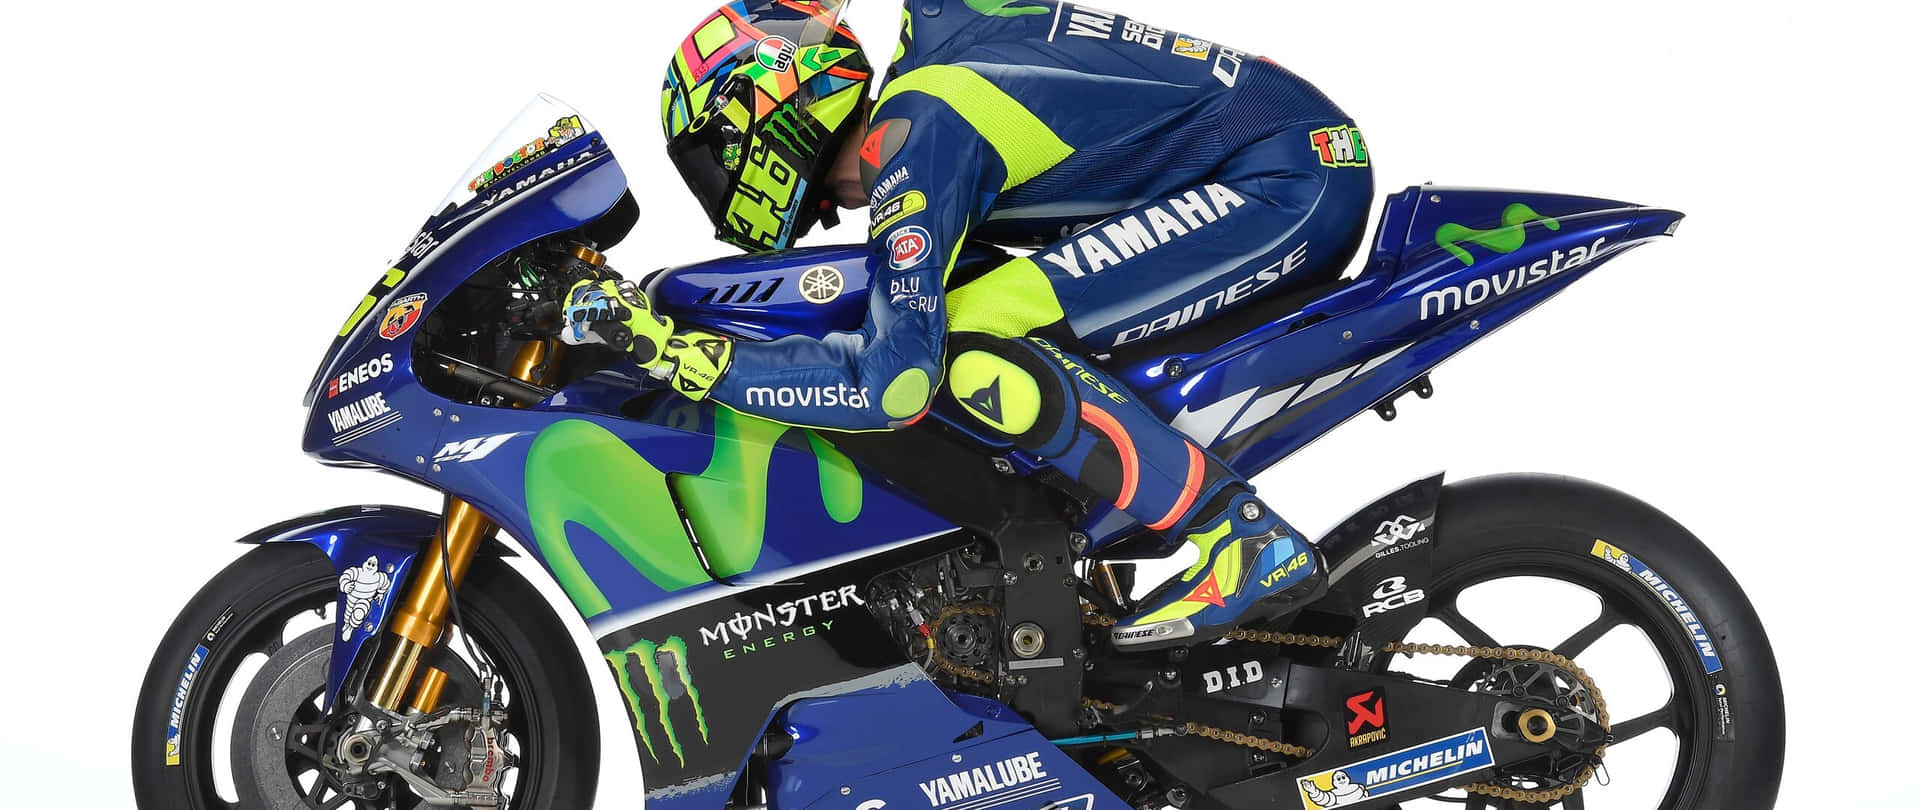 A thrilling ride with the VR46 Yamaha Monster Energy Motorcycle Wallpaper